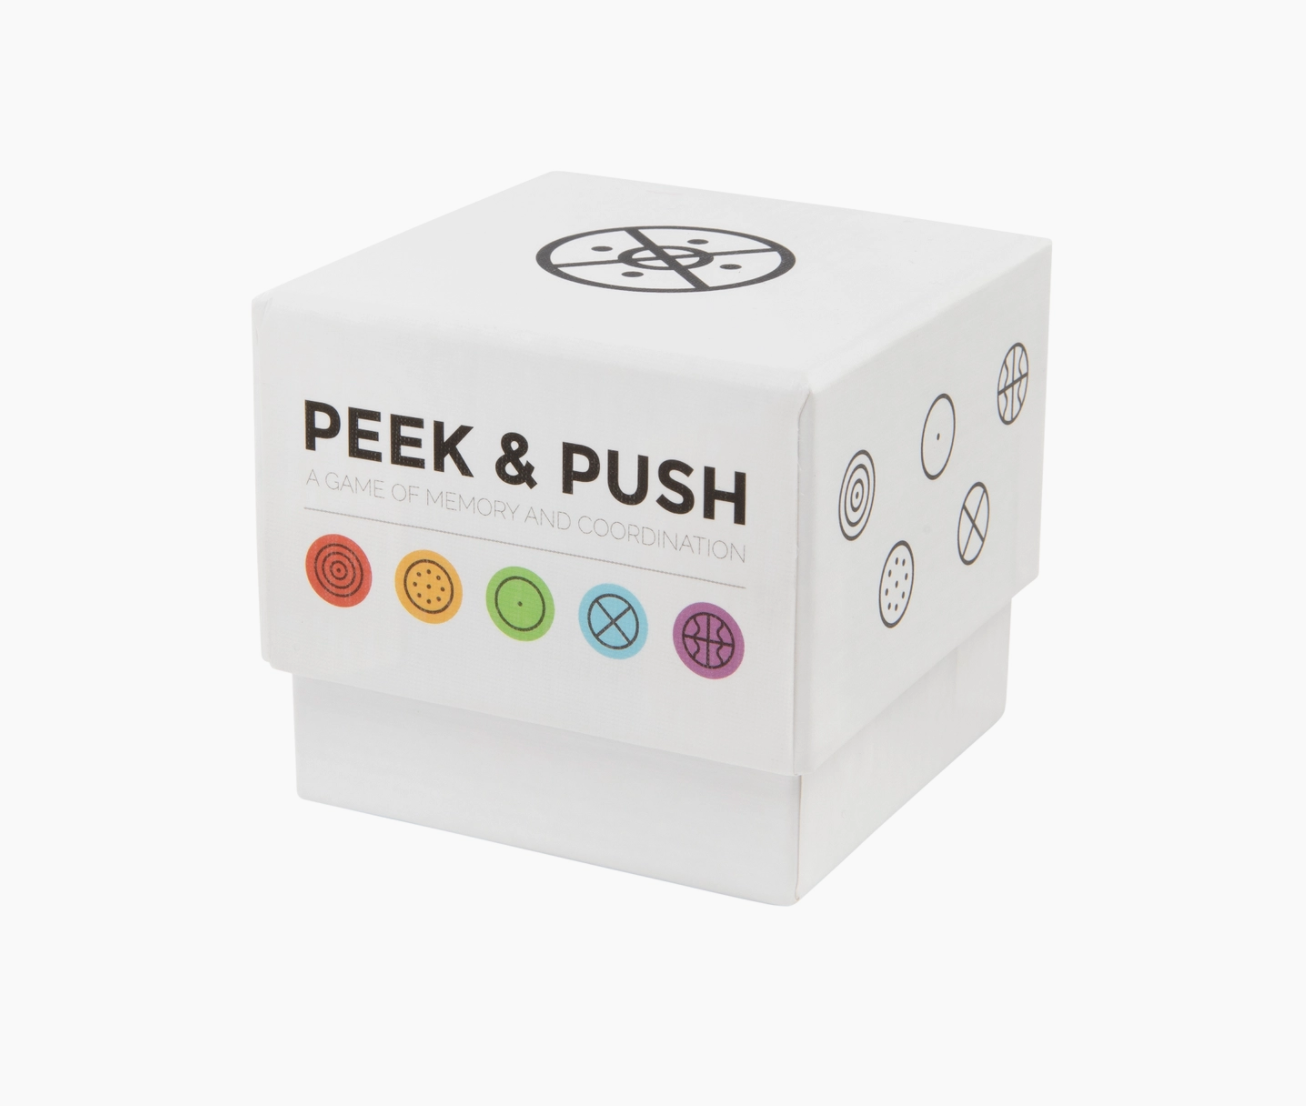 Peek and Push Memory and Coordination Game By Stellar Factory at Le Monkey House